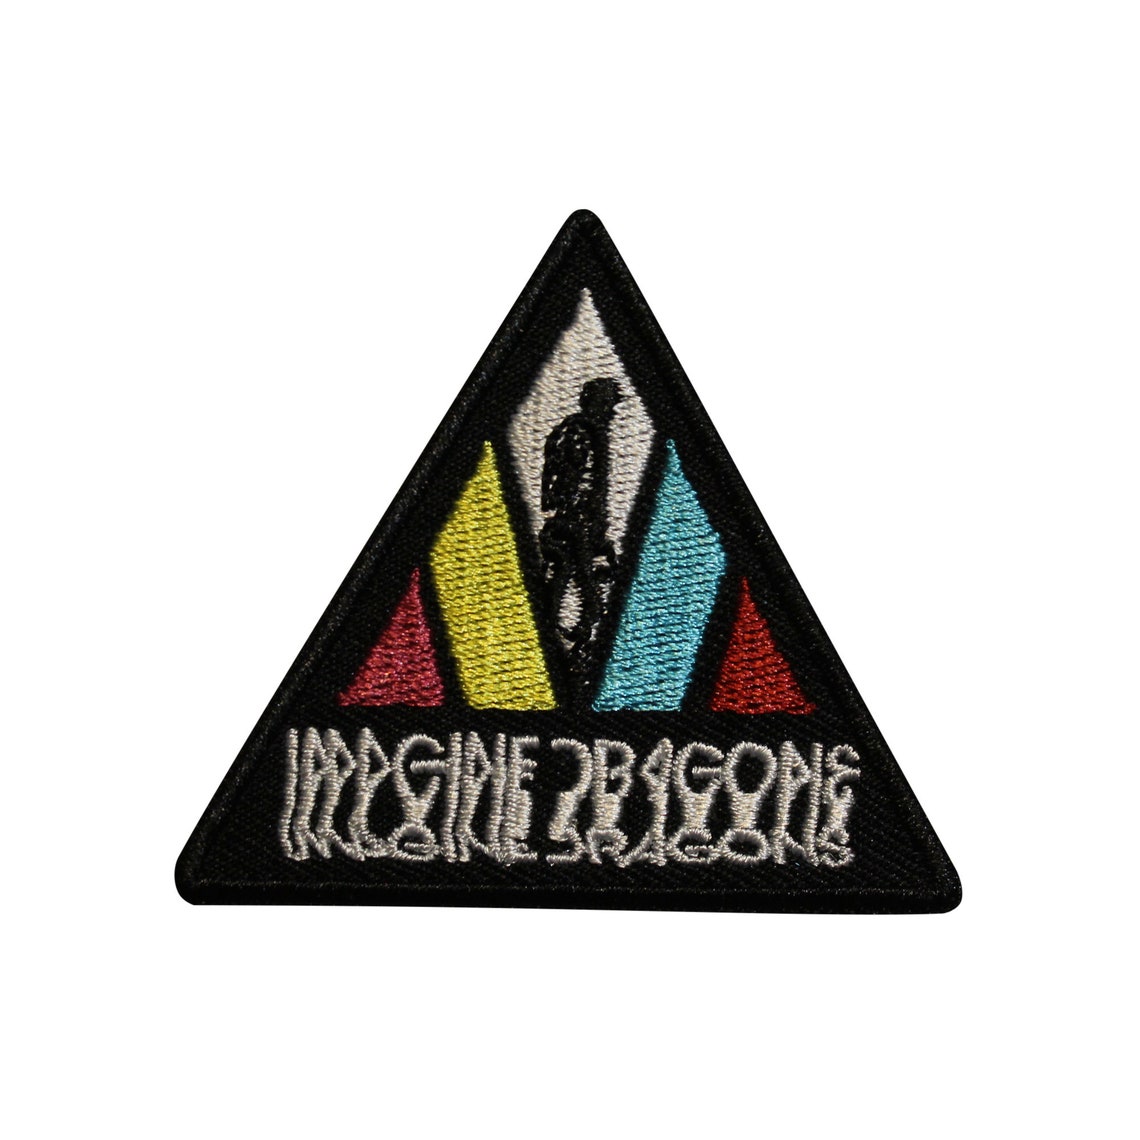 Imagine Dragons Blurred Triangle Logo Embroidered Iron on | Etsy